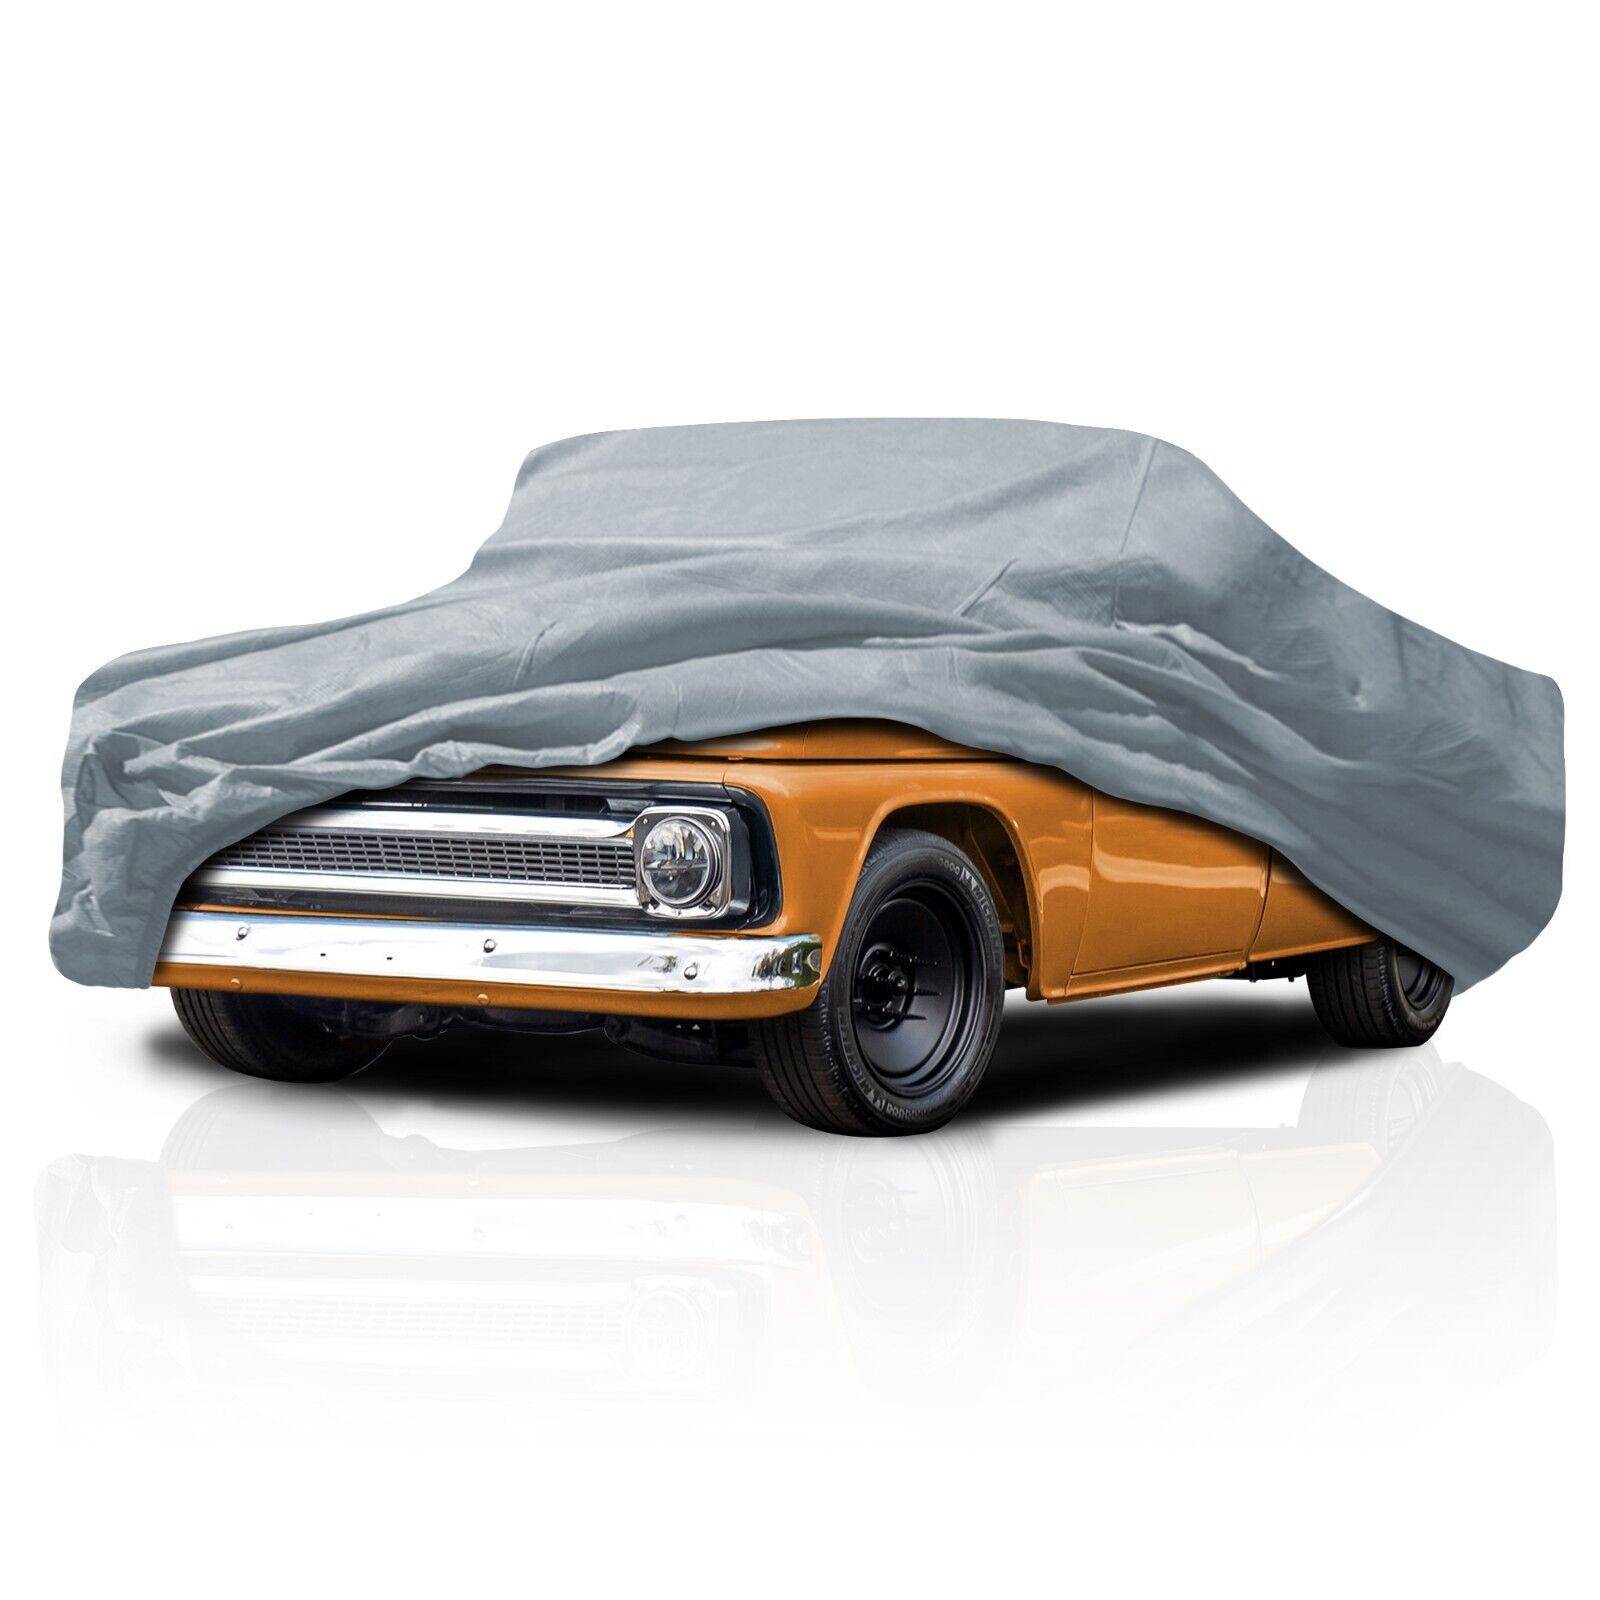 WeatherTec Plus HD Truck Cover for 1960-1966 Chevrolet C10 Standard Cab Long Bed